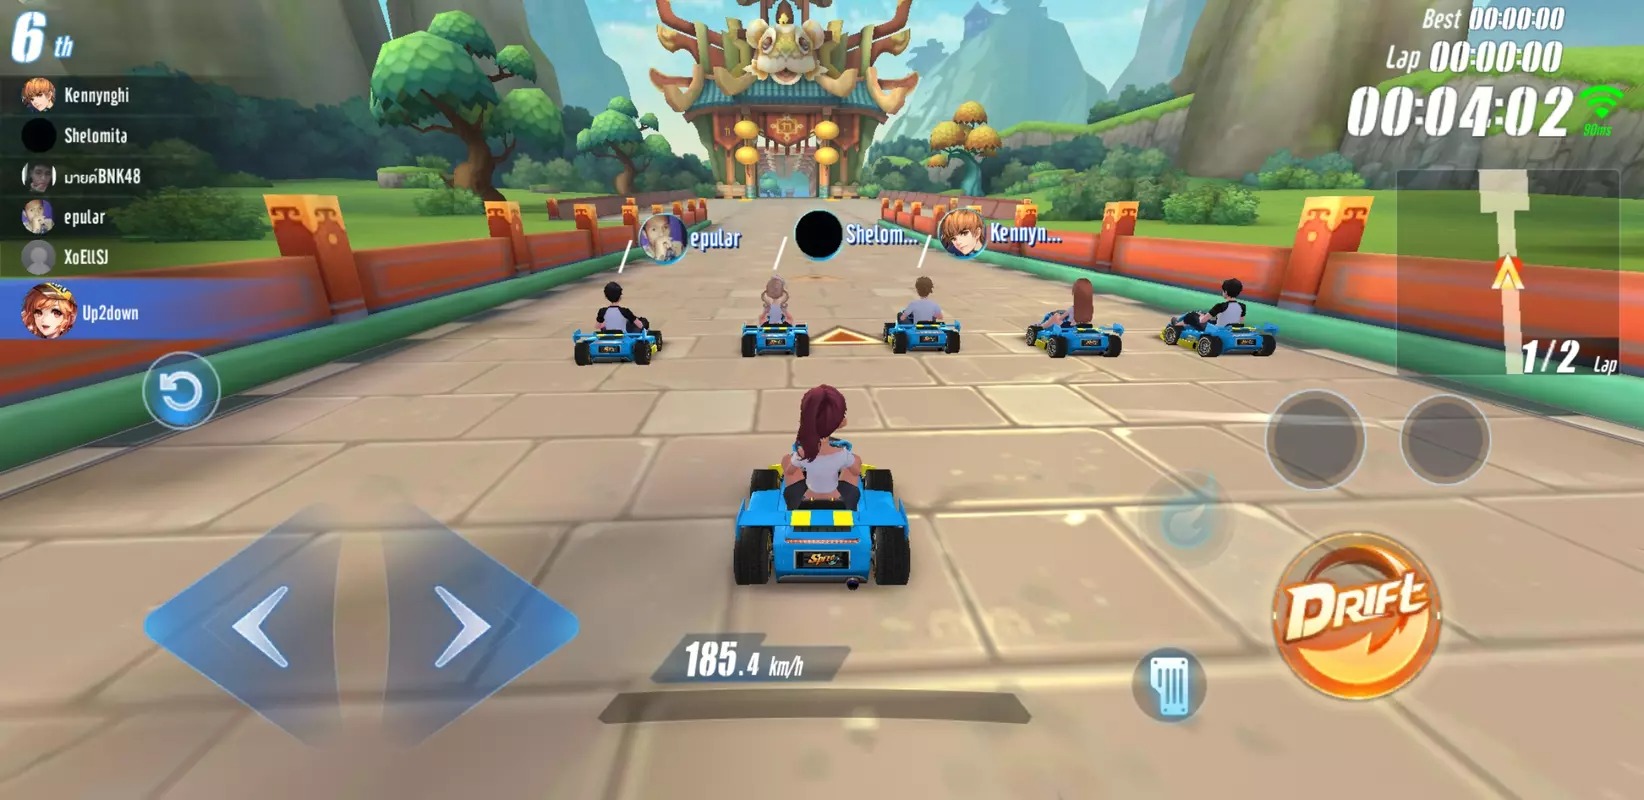 Garena Speed Drifters: several characters in their karts positioned at the starting line